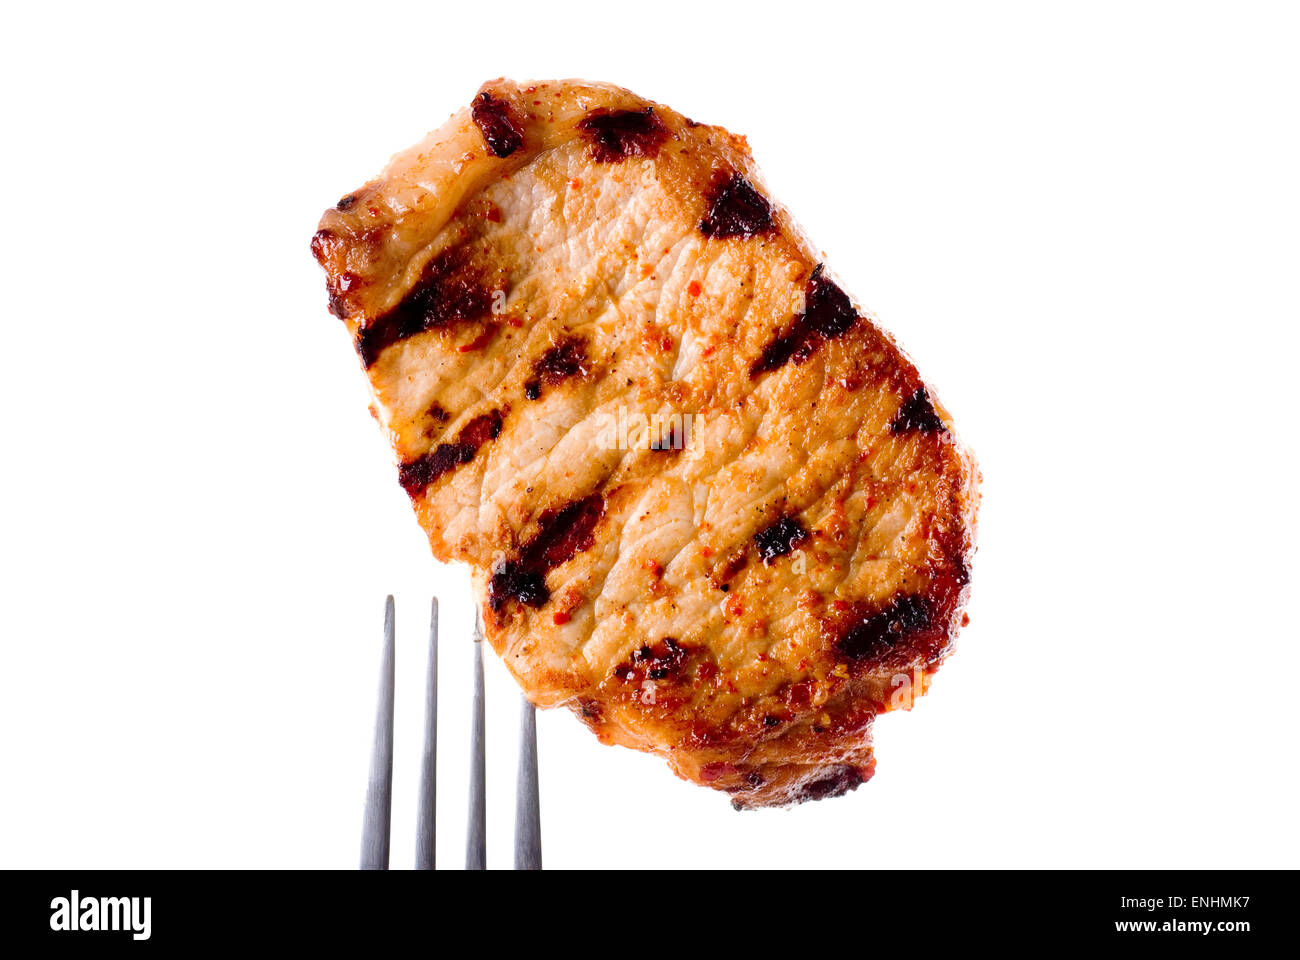 Grilled pork chop without bone on a fork. Spiced with dried chili and paprika. Stock Photo